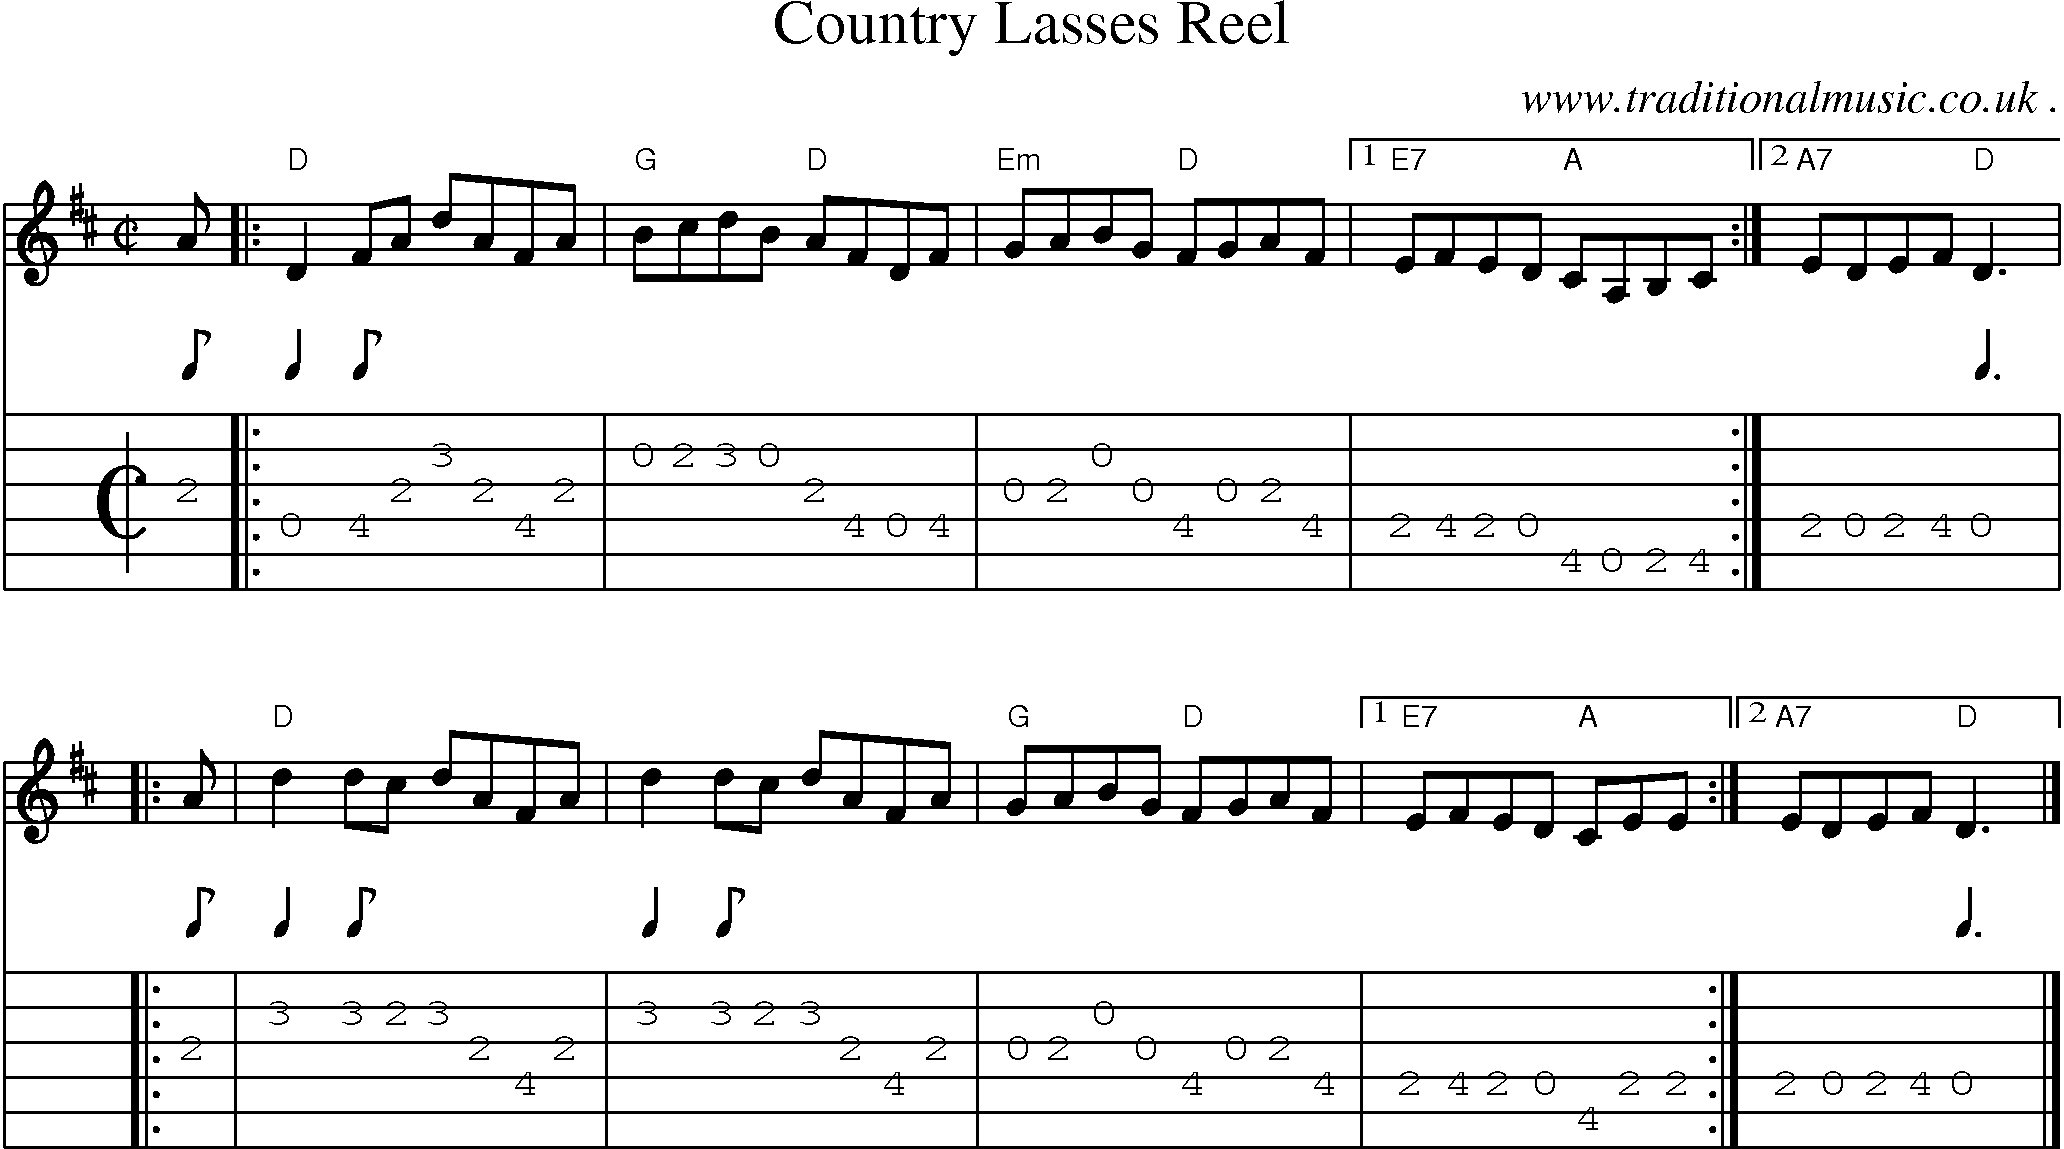 Sheet-music  score, Chords and Guitar Tabs for Country Lasses Reel